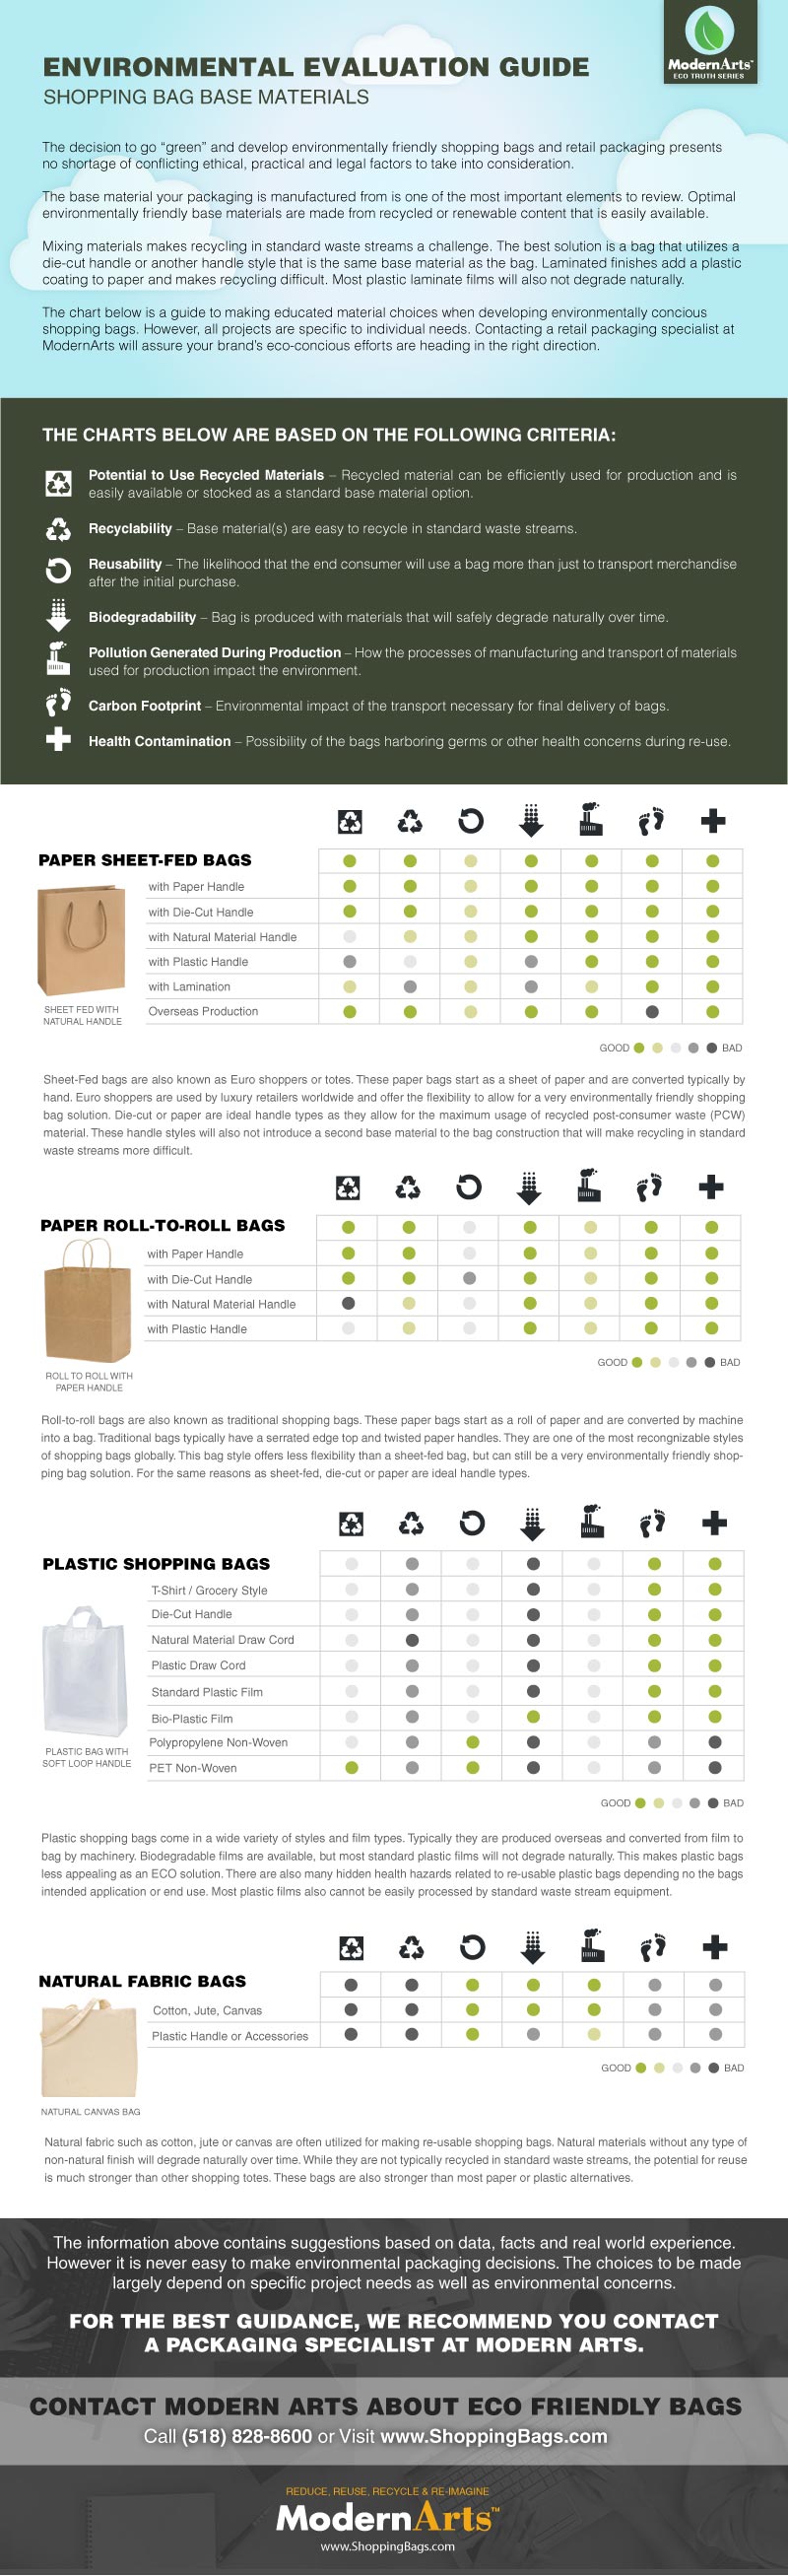 shopping bag and retail packaging base material eco friendly guide